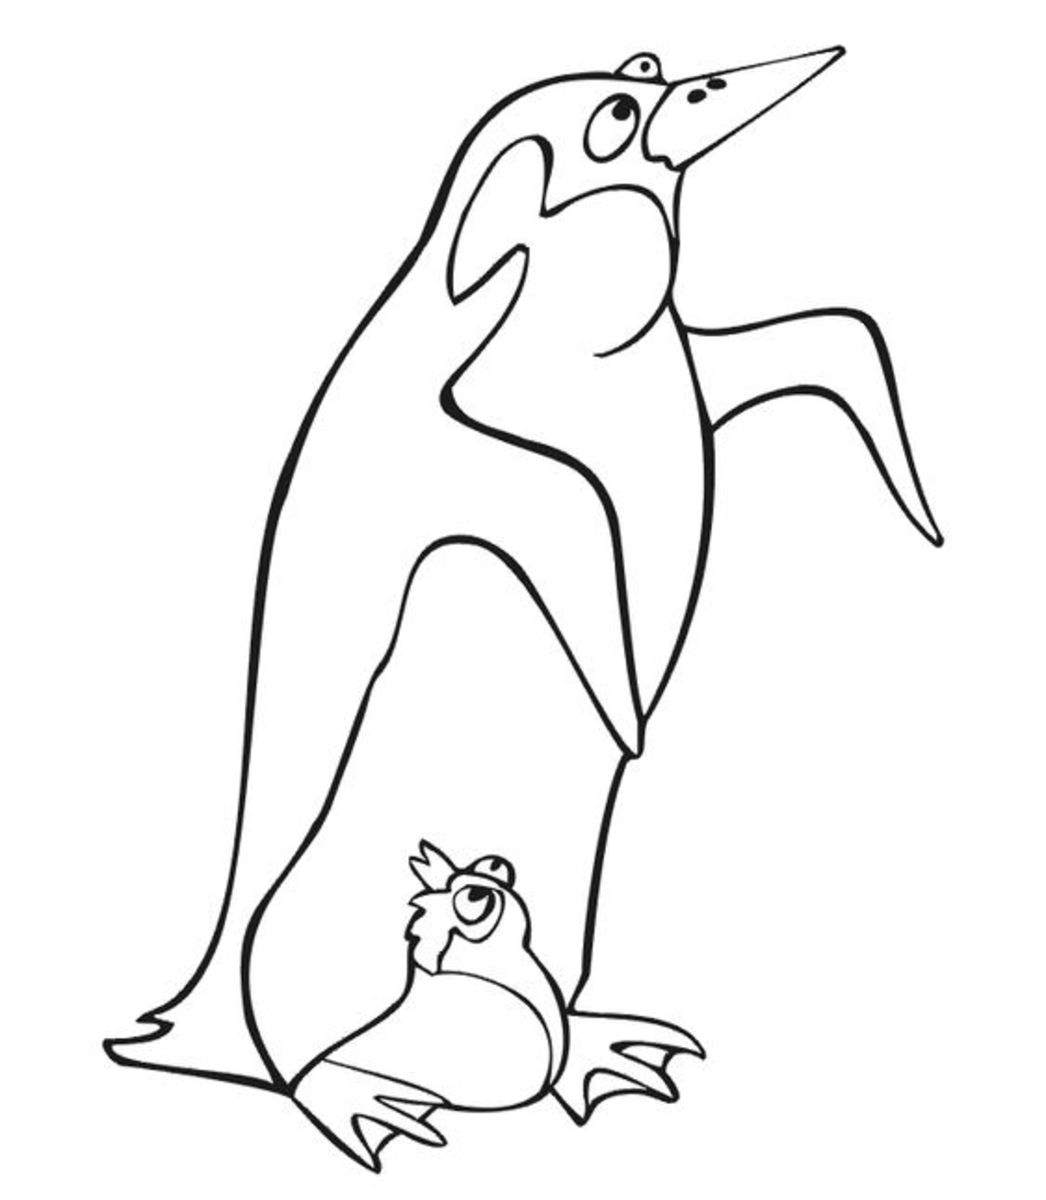 Find free, printable coloring pages of Penguins and free printable Penguin games too.